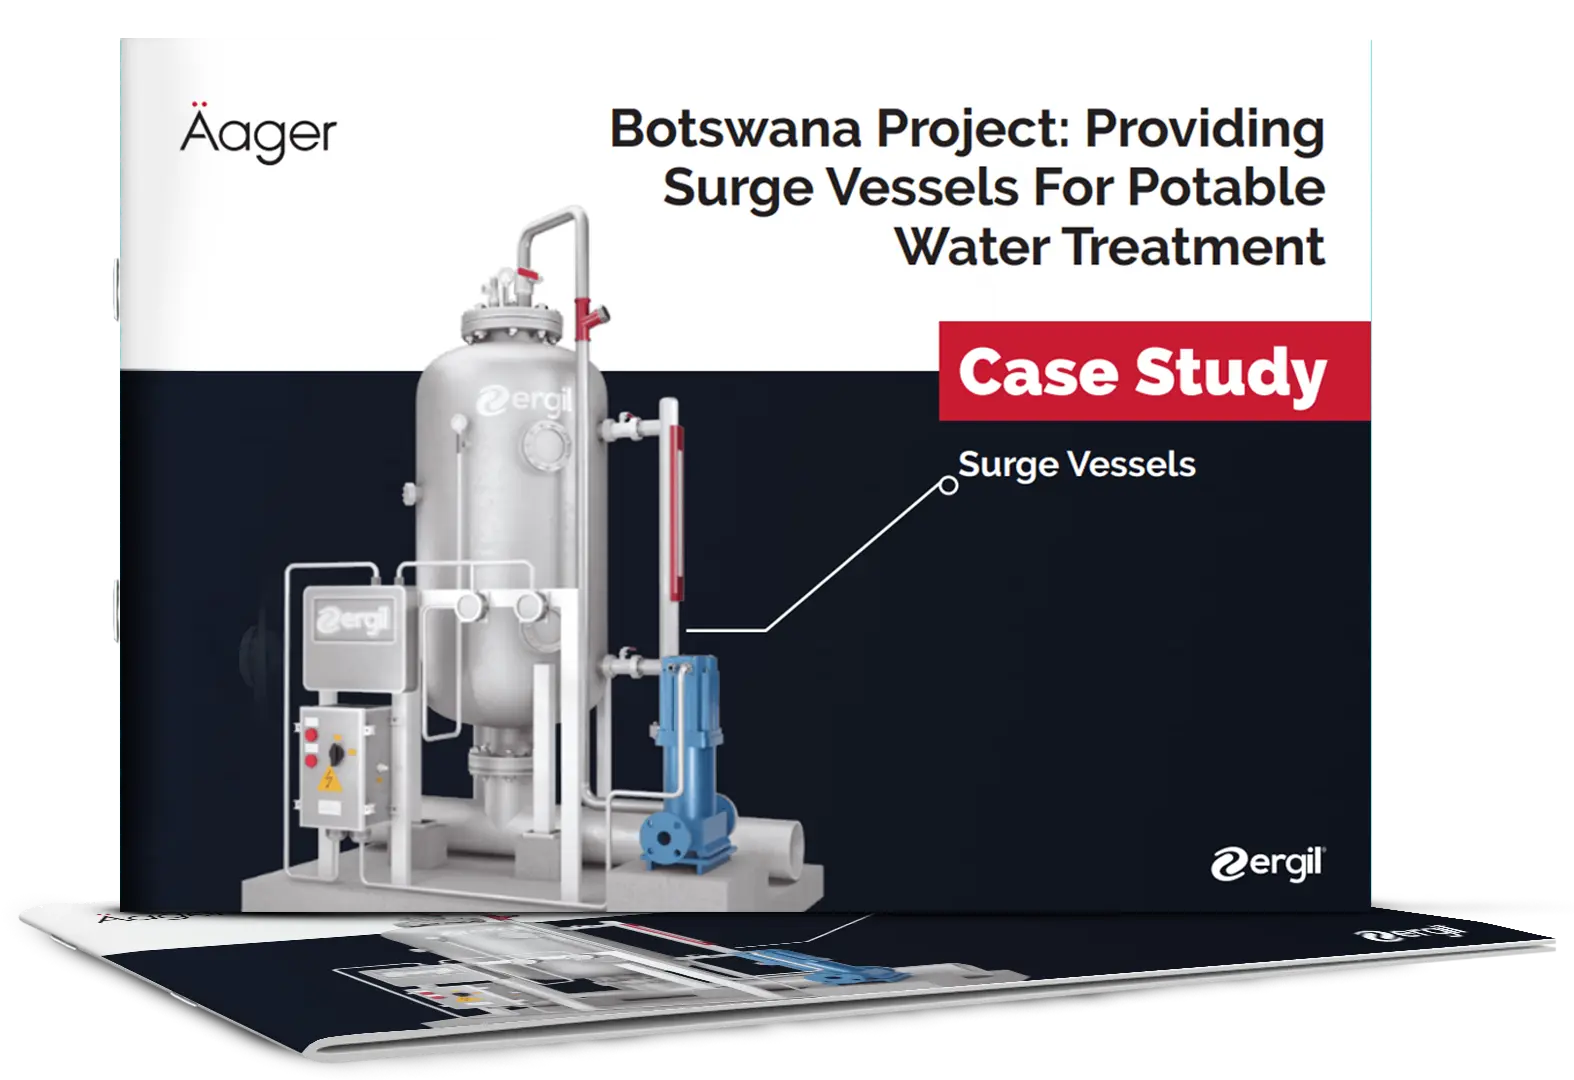 Botswana Project: Providing Surge Vessels for Potable Water Treatment 43